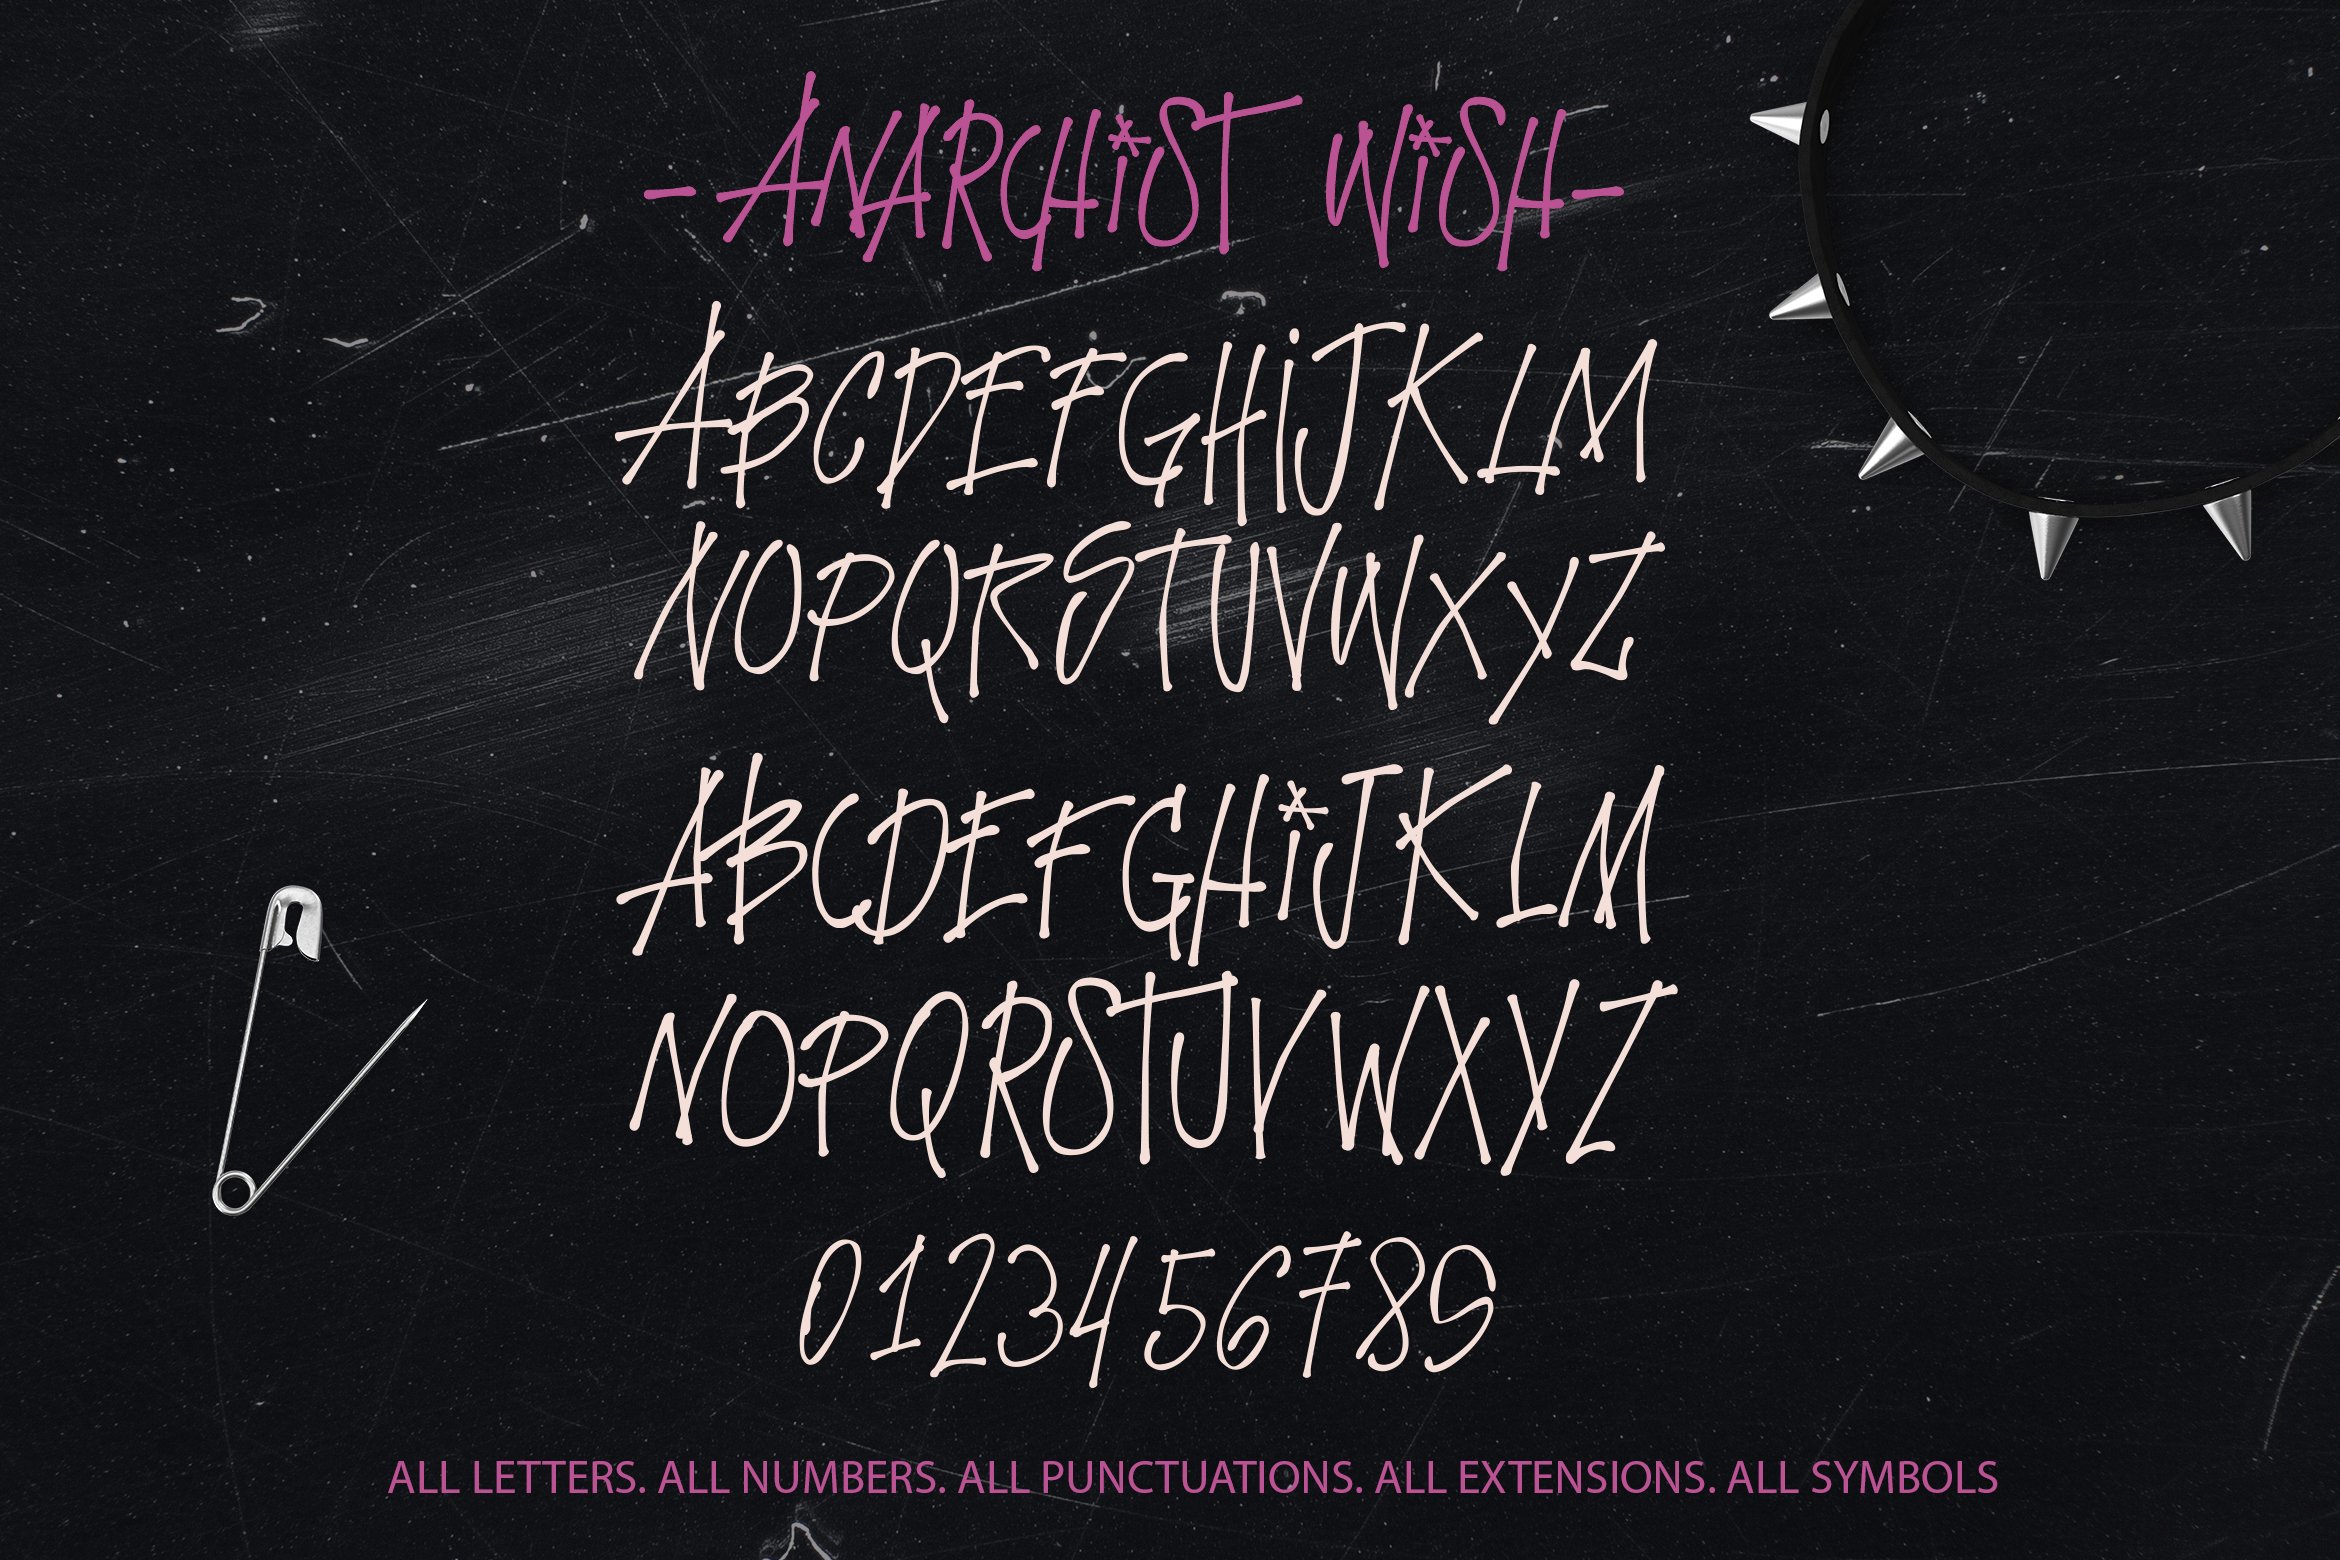 Anarchist Wish preview image.